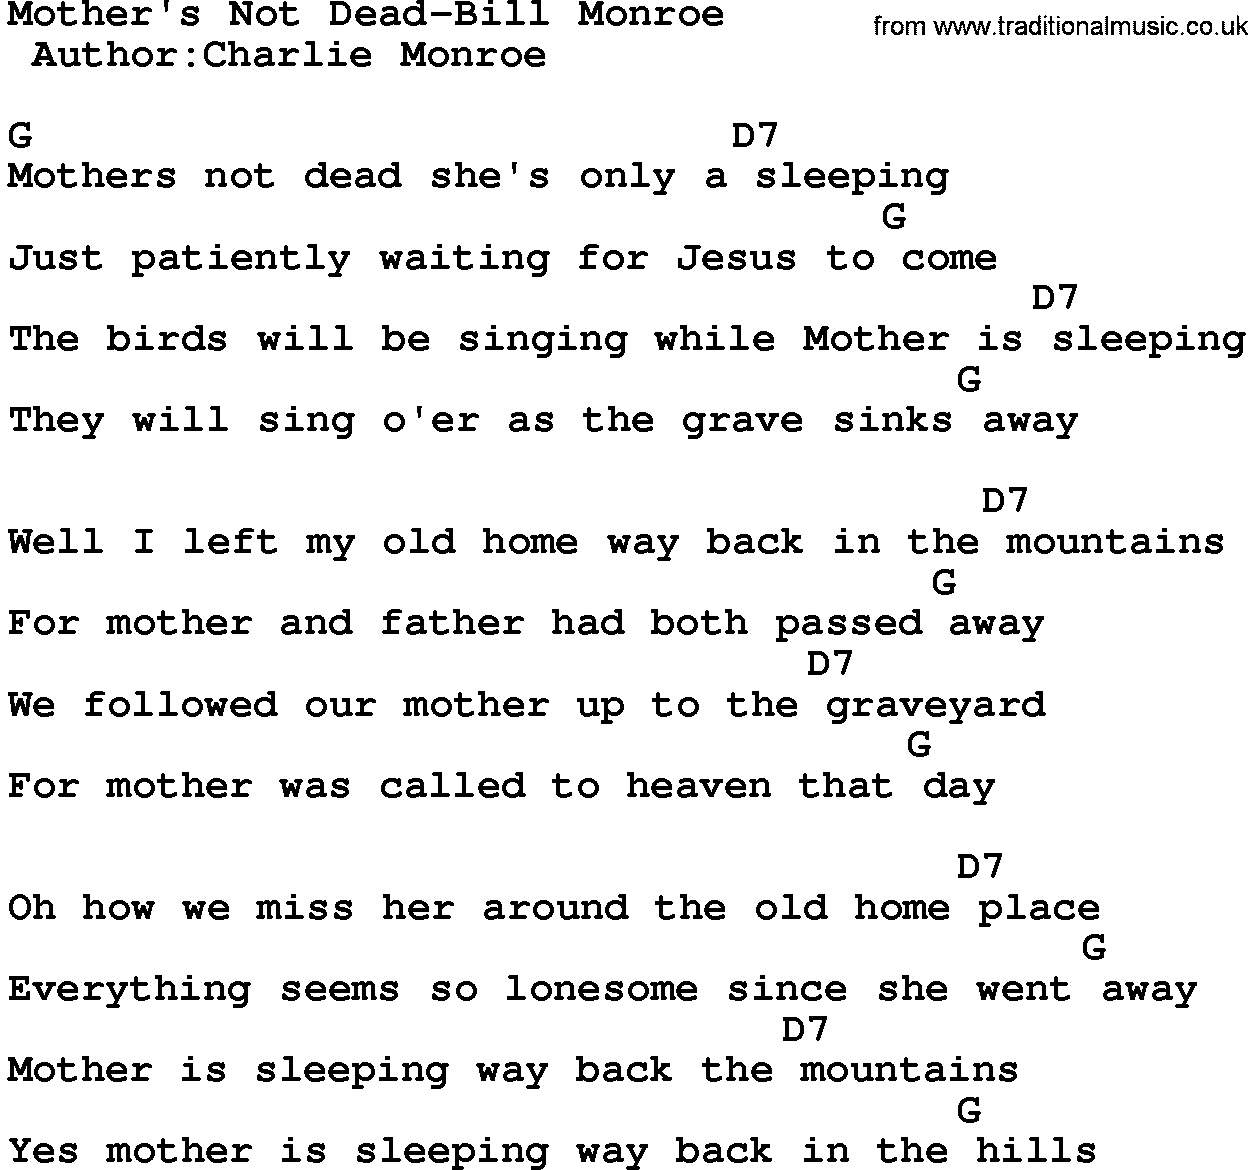 Country music song: Mother's Not Dead-Bill Monroe lyrics and chords